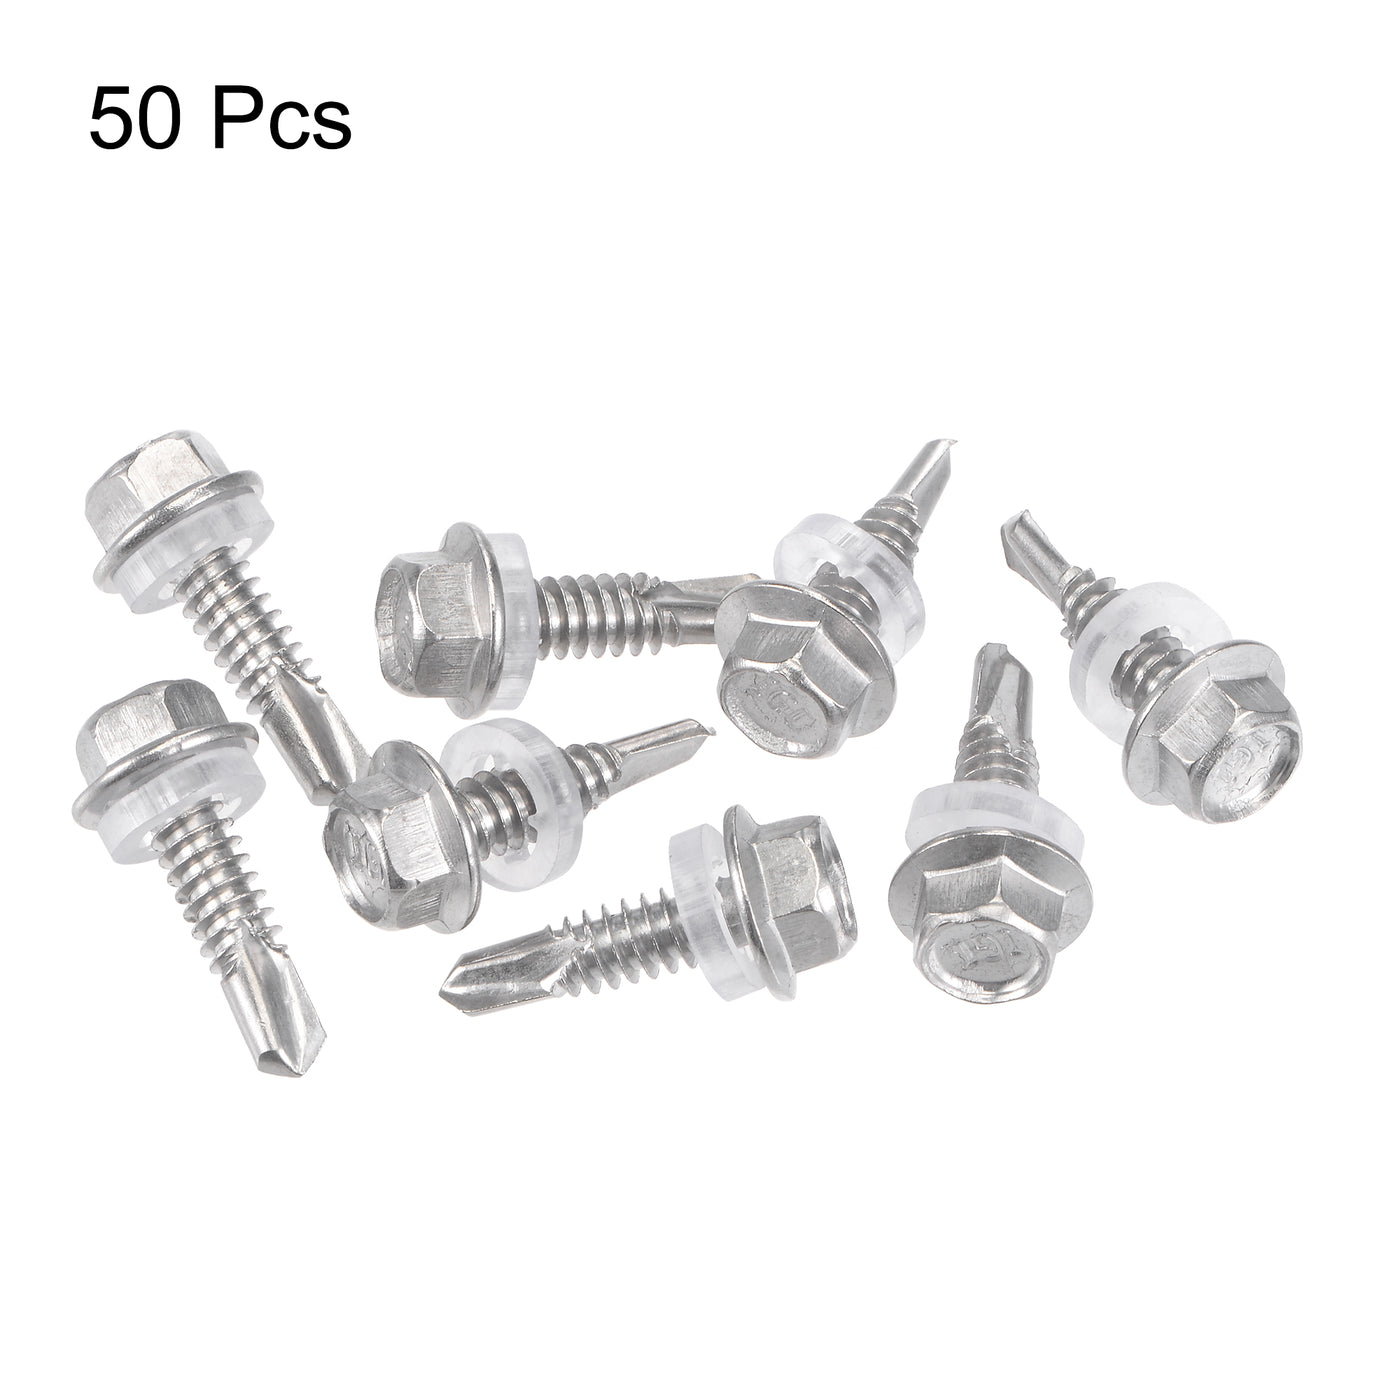 uxcell Uxcell #12 x 3/4" 410 Stainless Steel Hex Washer Head Self Drilling Screws 50pcs